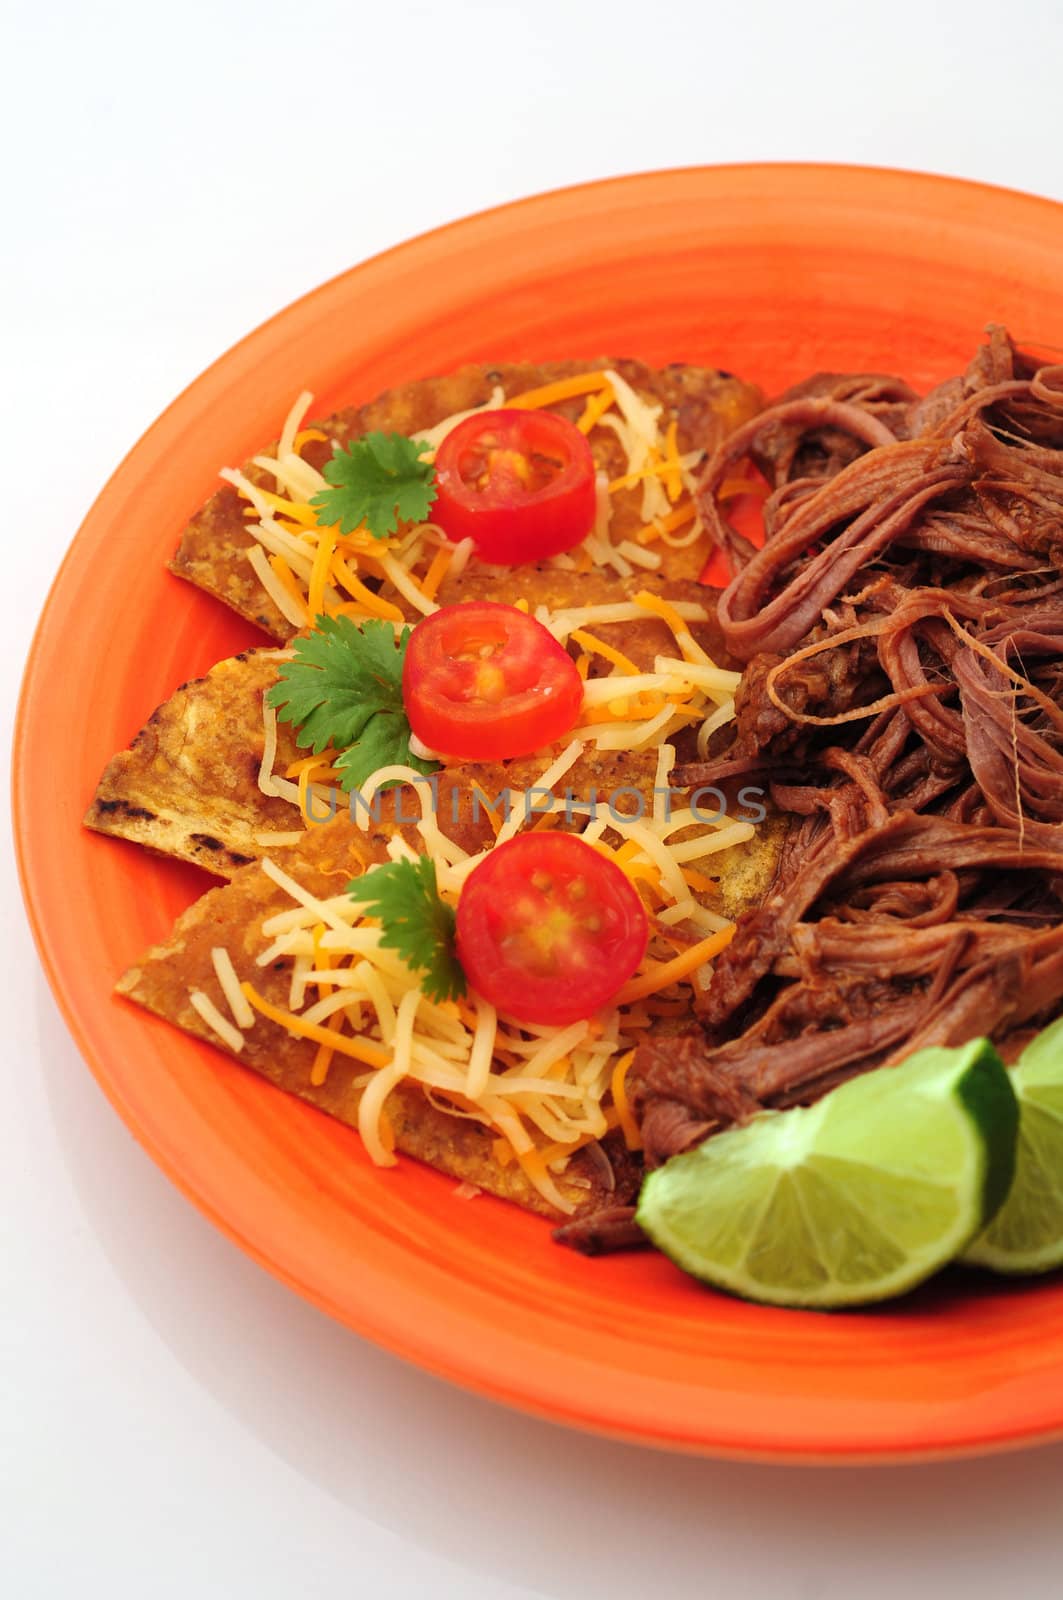 Nachos and shredded beef on a white background by ftlaudgirl